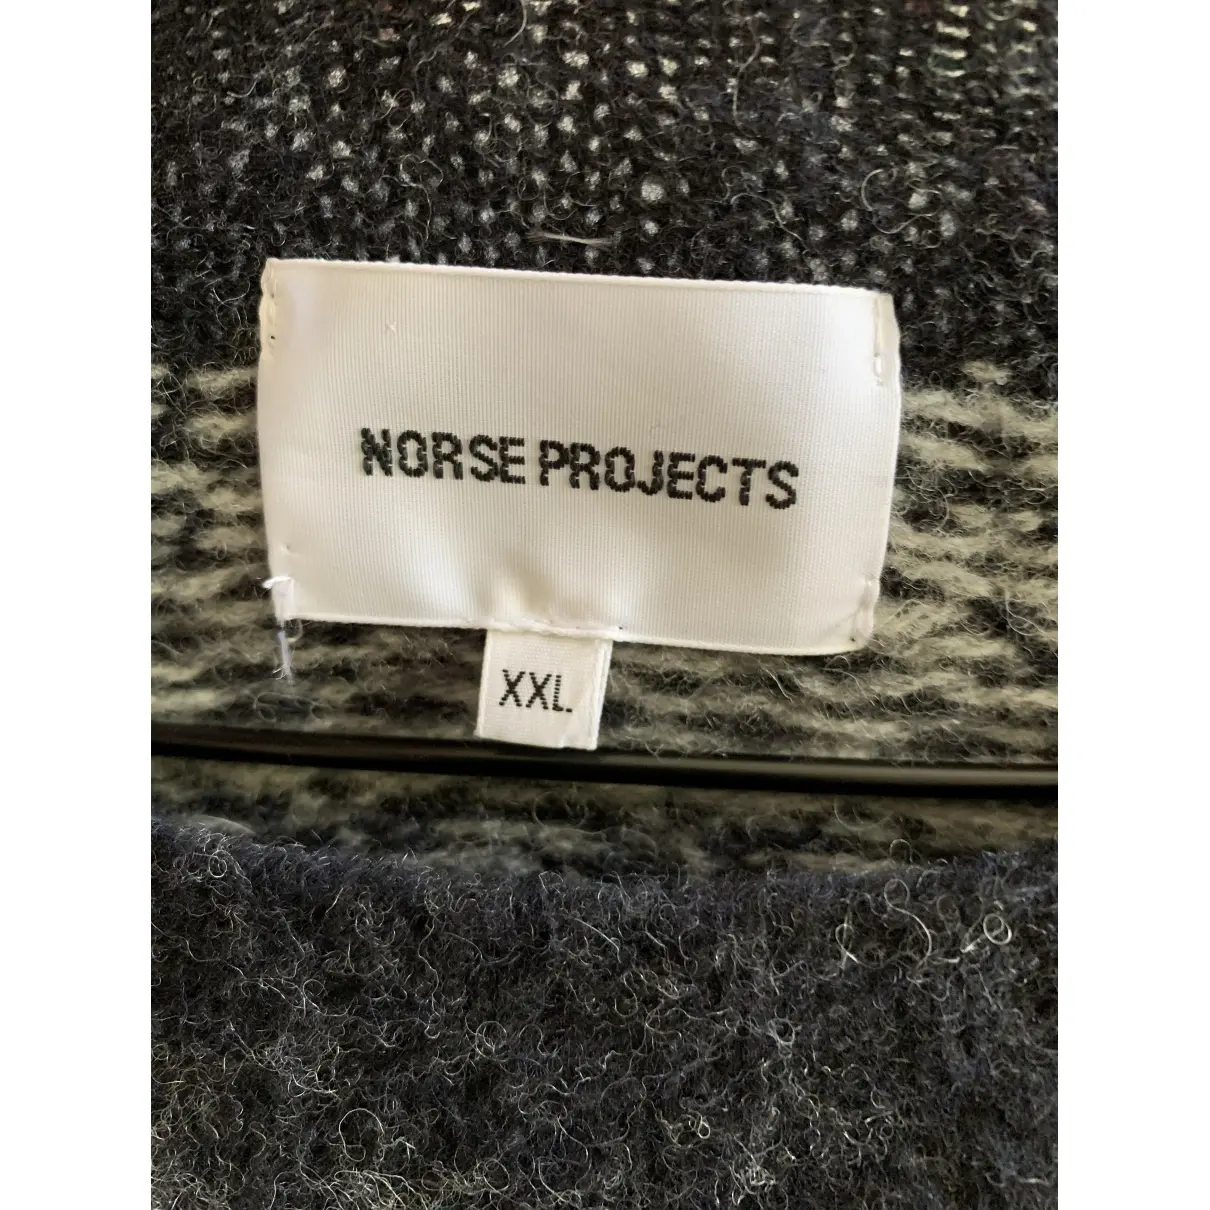 Buy Norse Projects Wool pull online